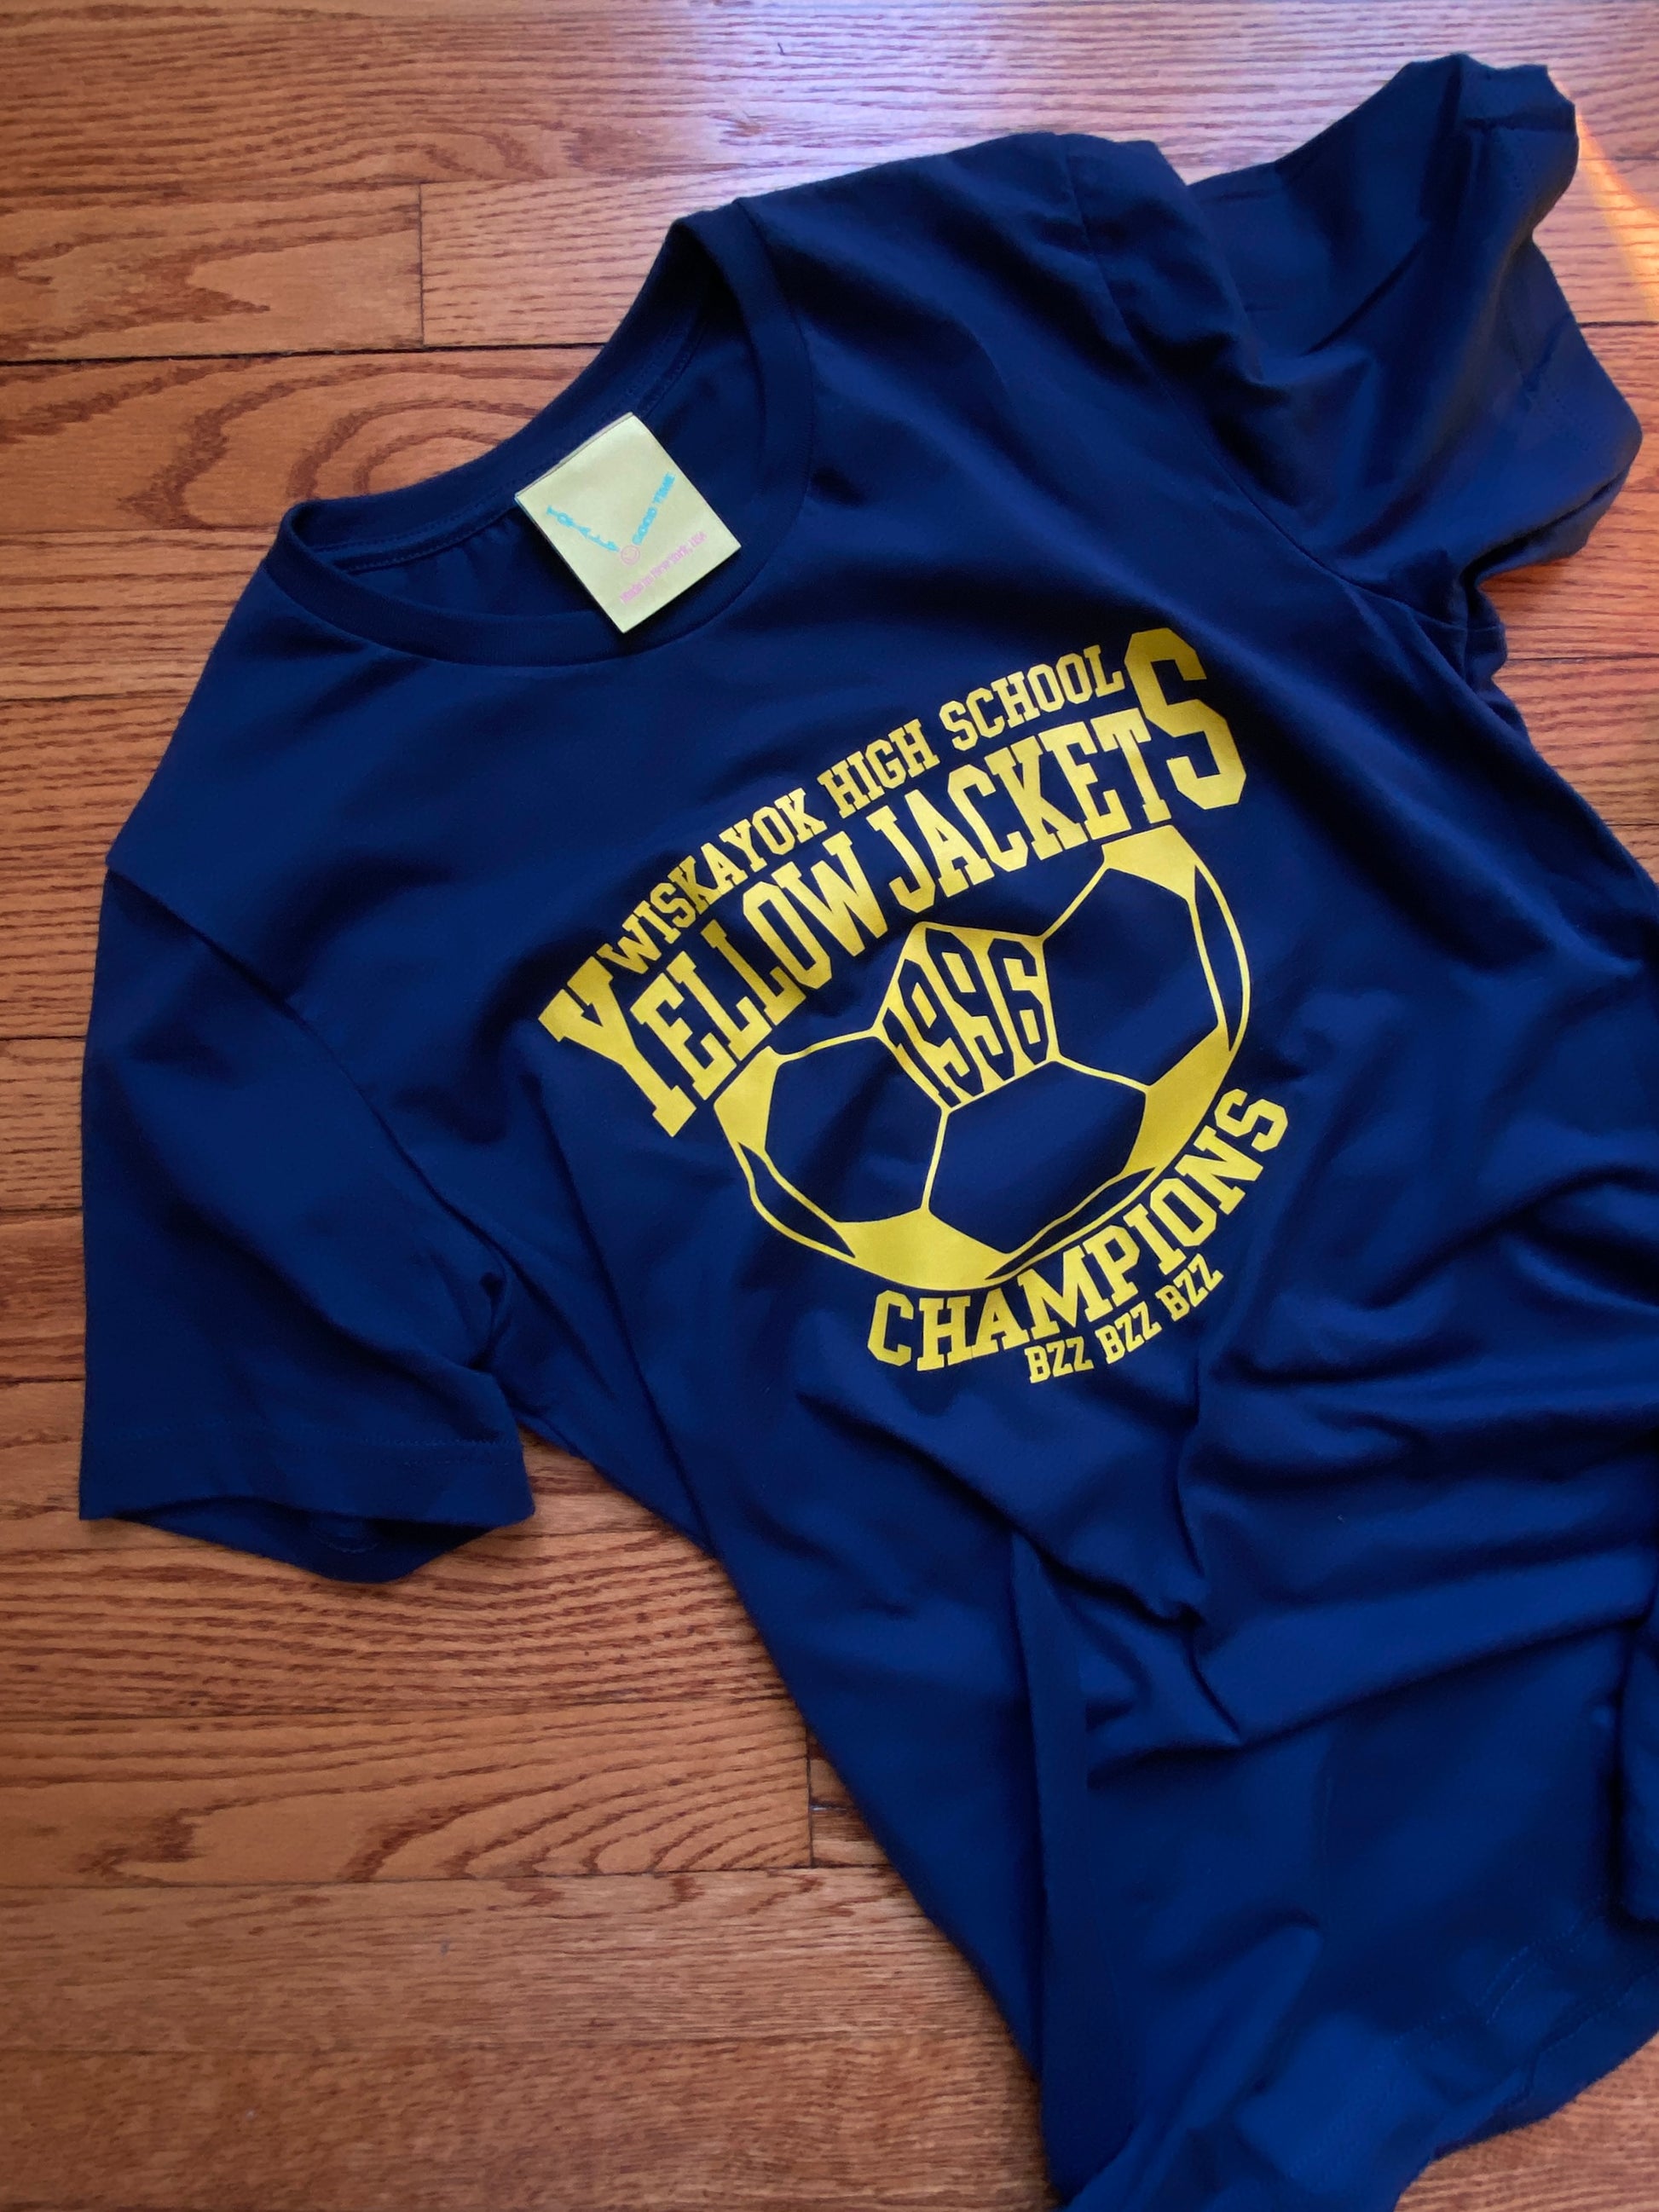 Yellowjackets Champions Tee - Totally Good Time